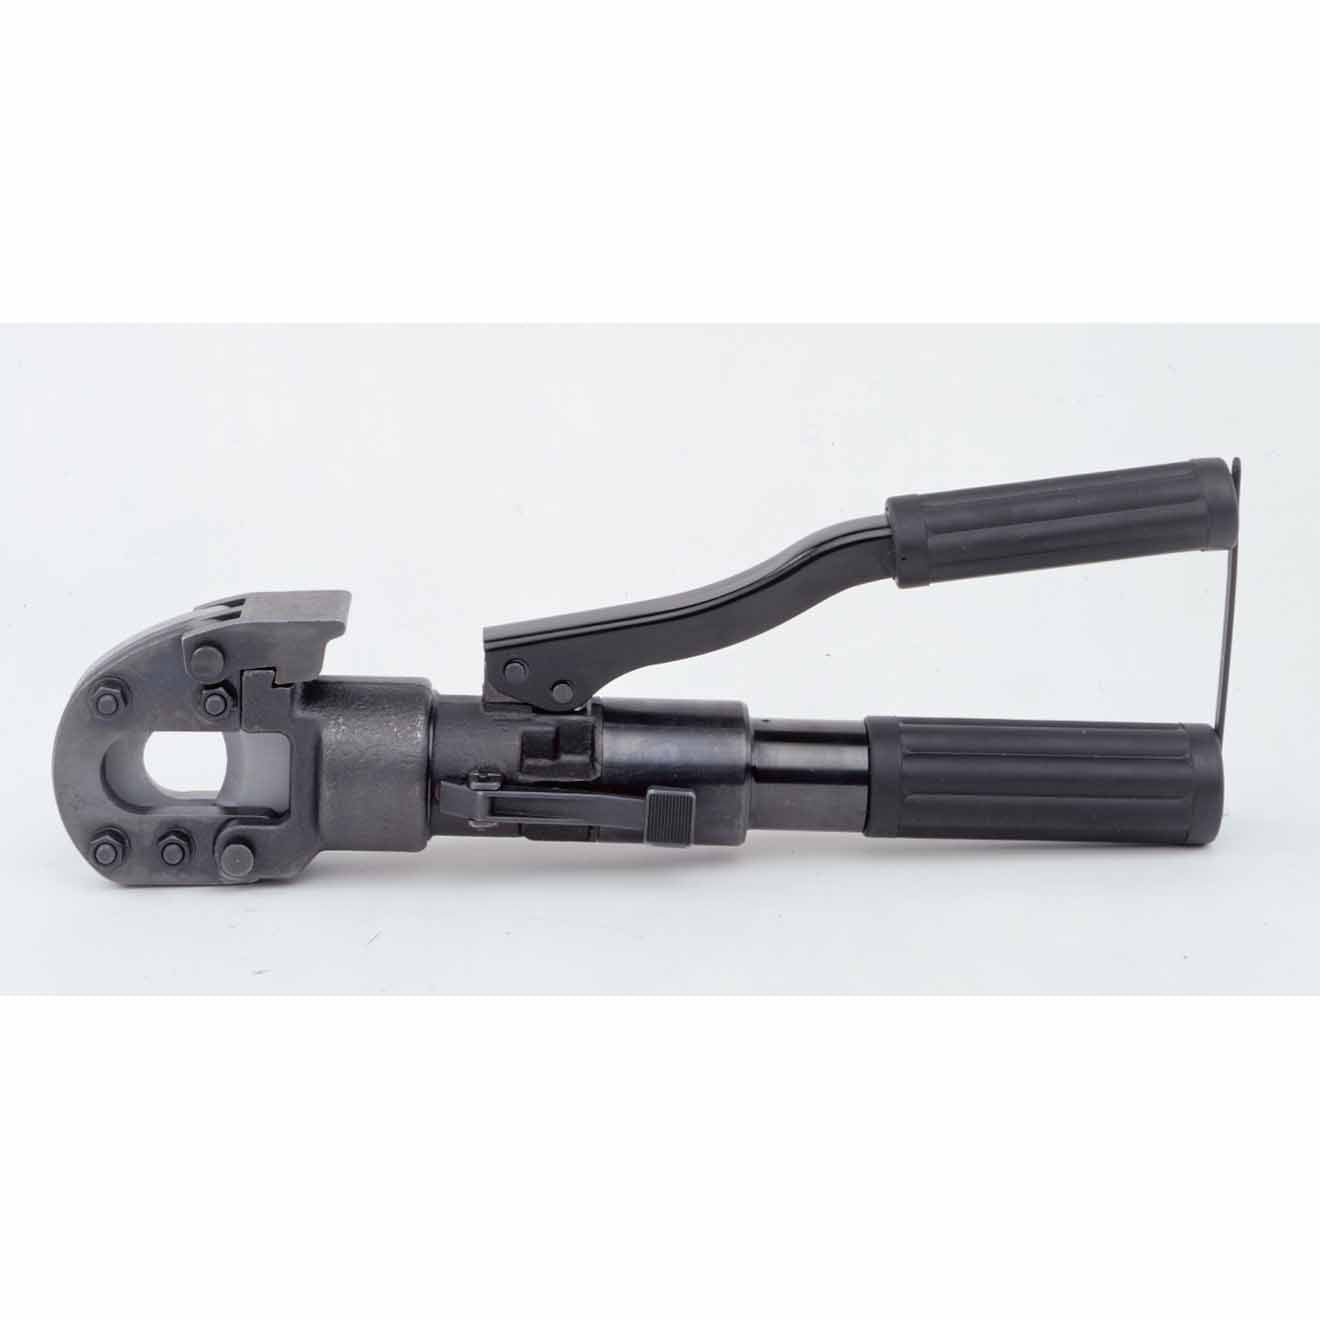 Greenlee HK520 Hydraulic ACSR Cable Cutter